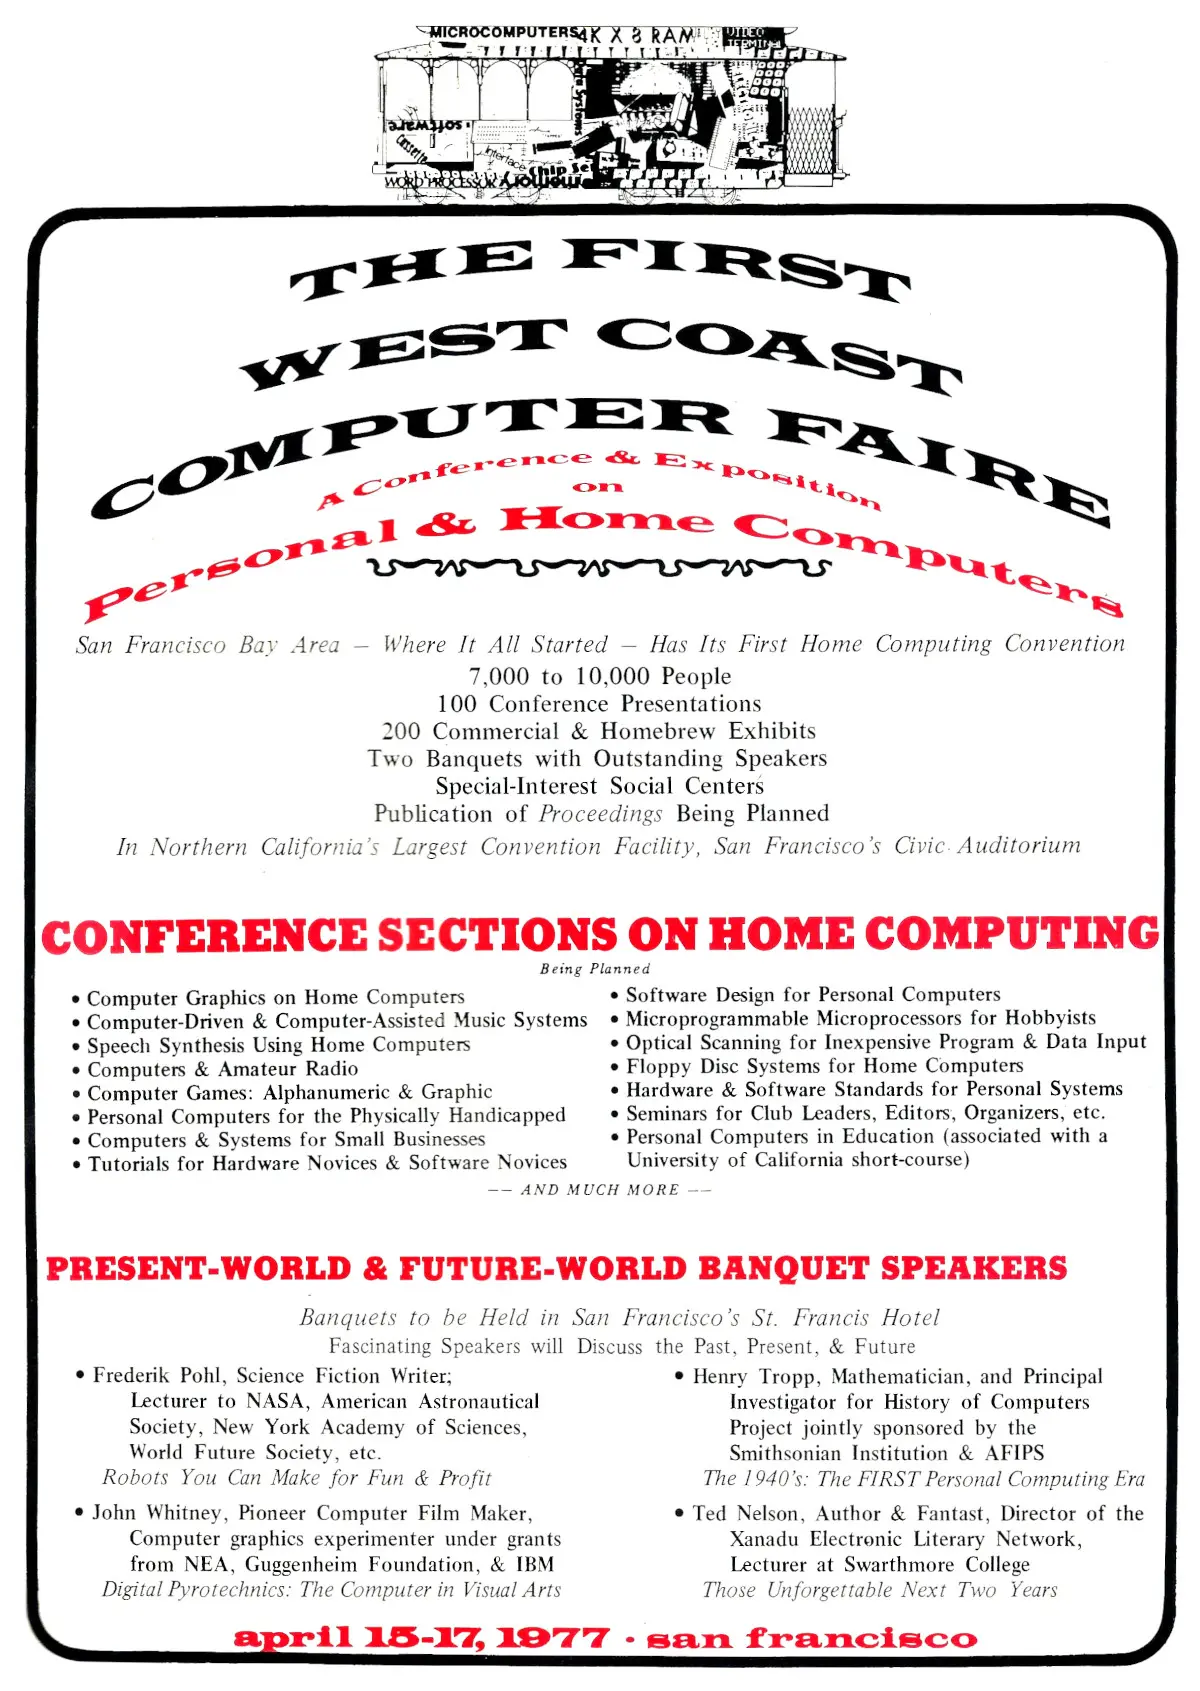 Advert for the West Coast Computer Faire in San Francisco, where the Commodore PET was shown.  From Byte - The Small Systems Journal, April 1977